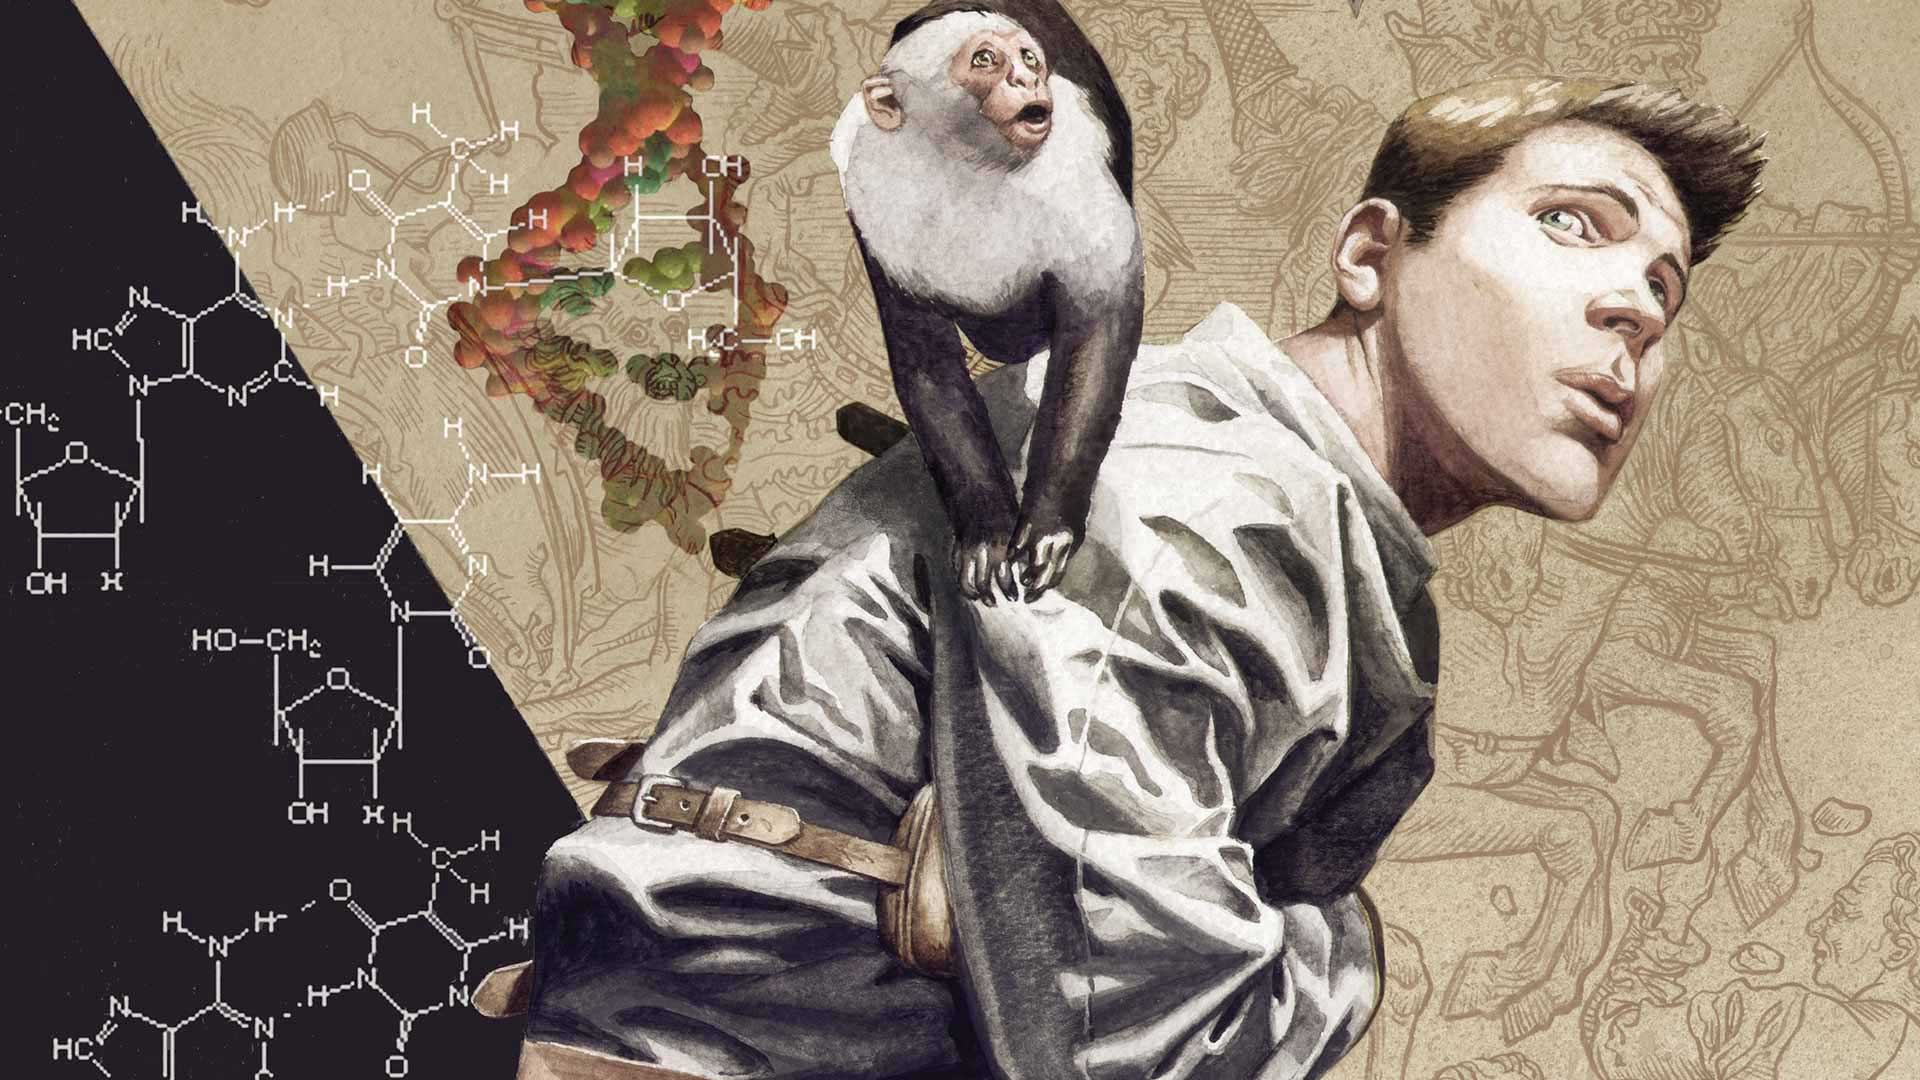 Y: The Last Man Comic Series Could Be The Best Read During This Pandemic